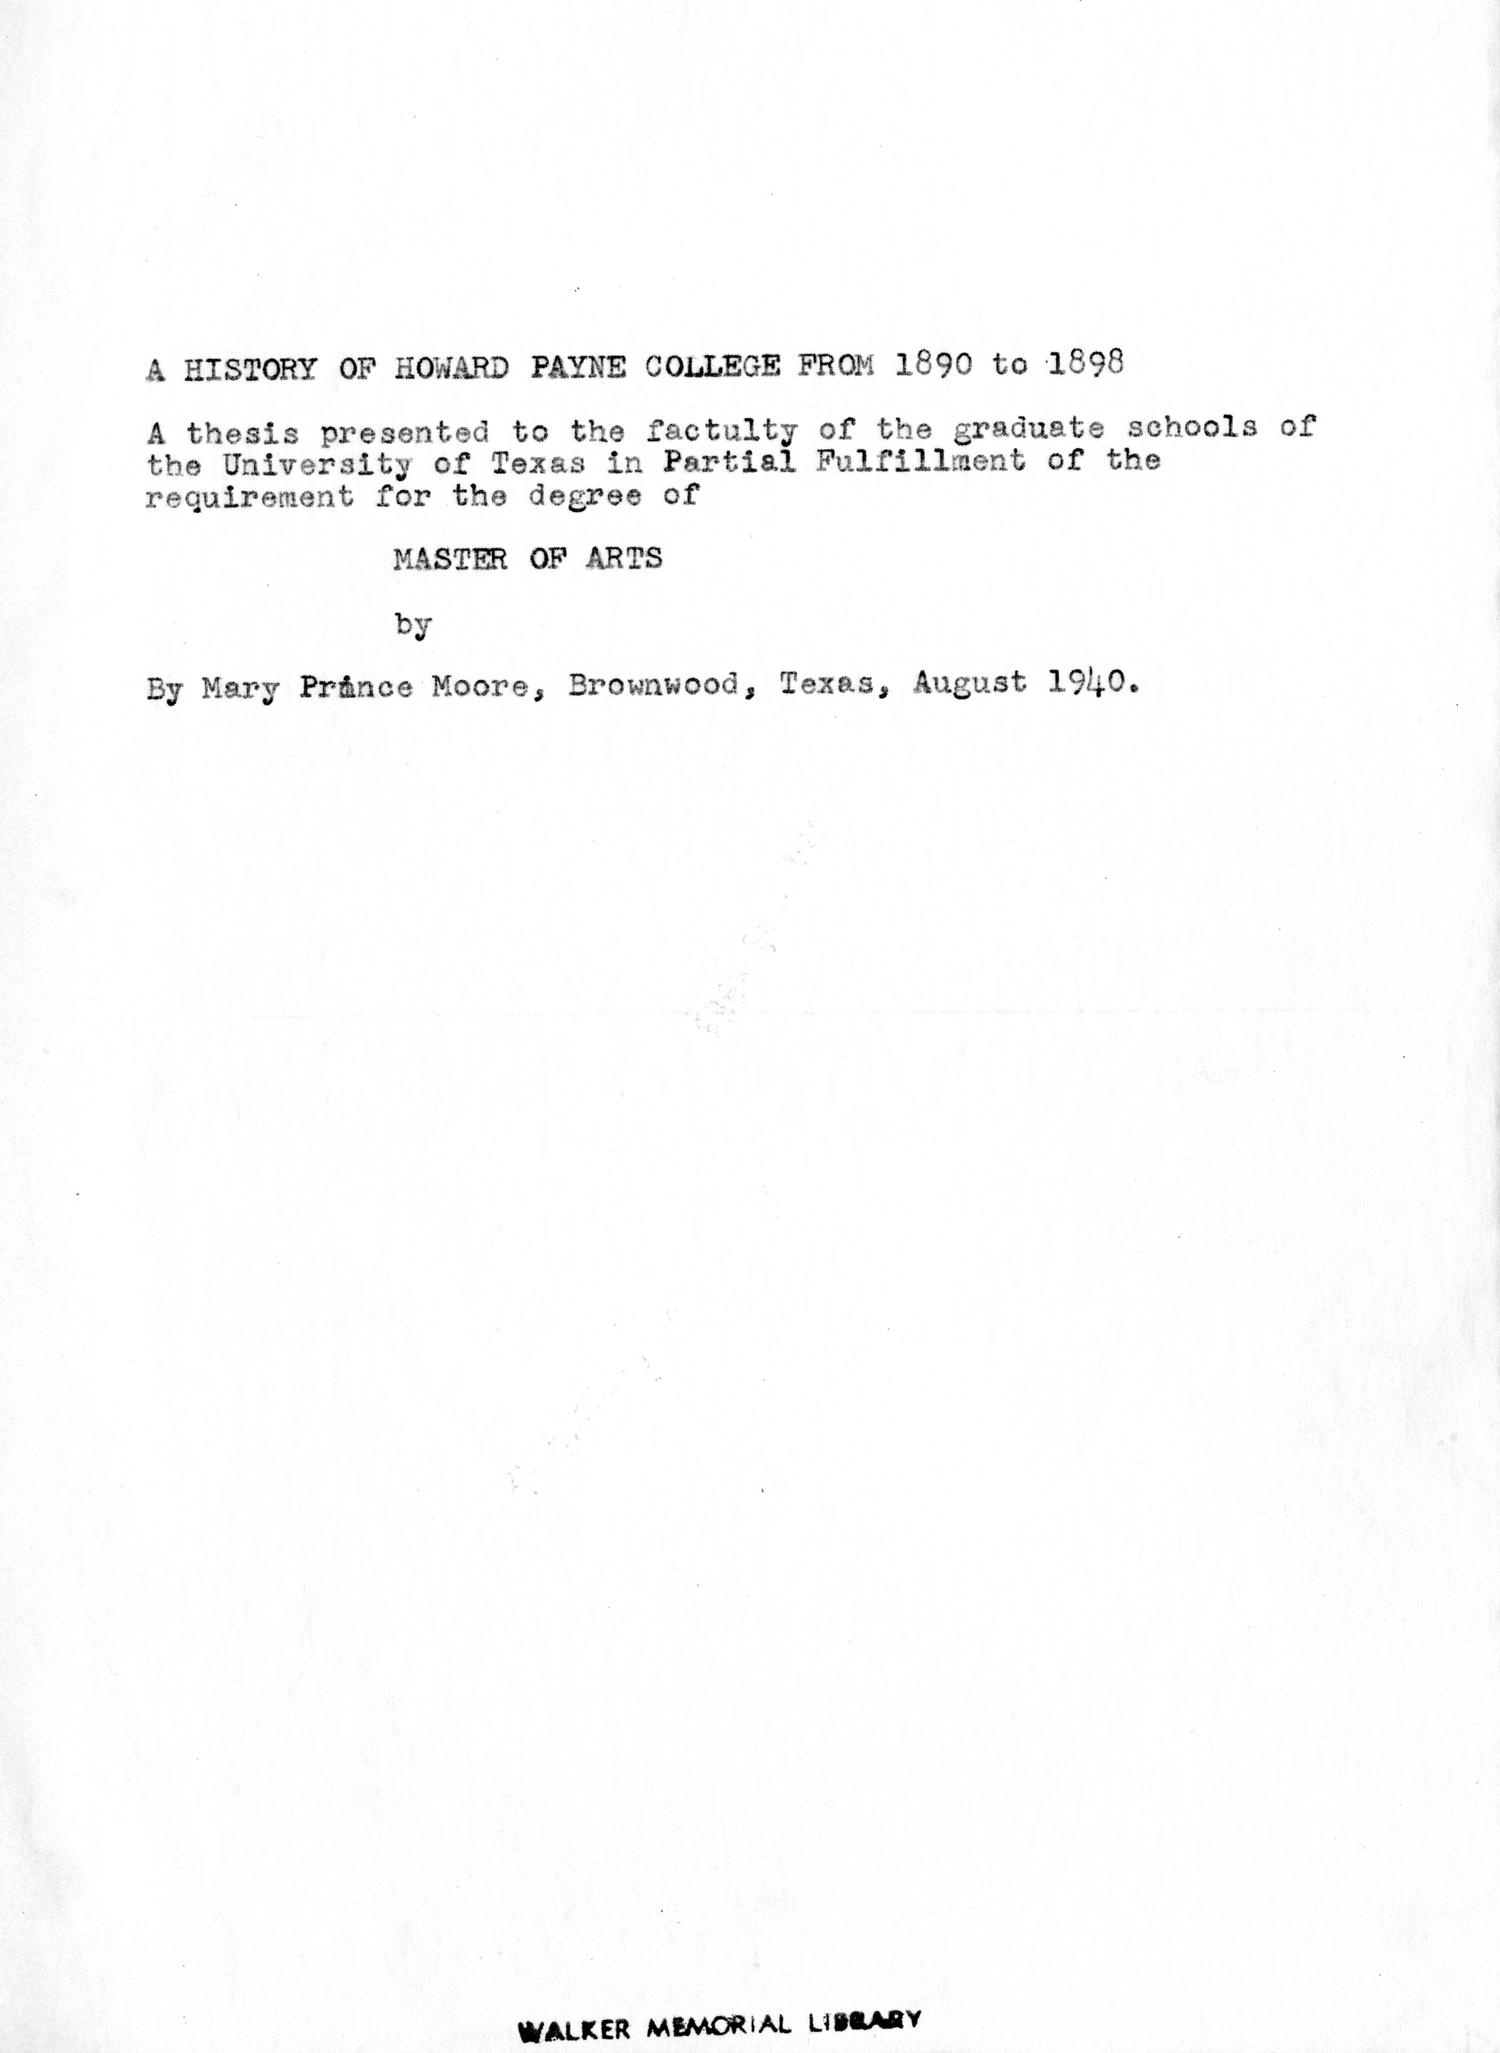 A History of Howard Payne College from 1890 to 1898
                                                
                                                    Title Page
                                                